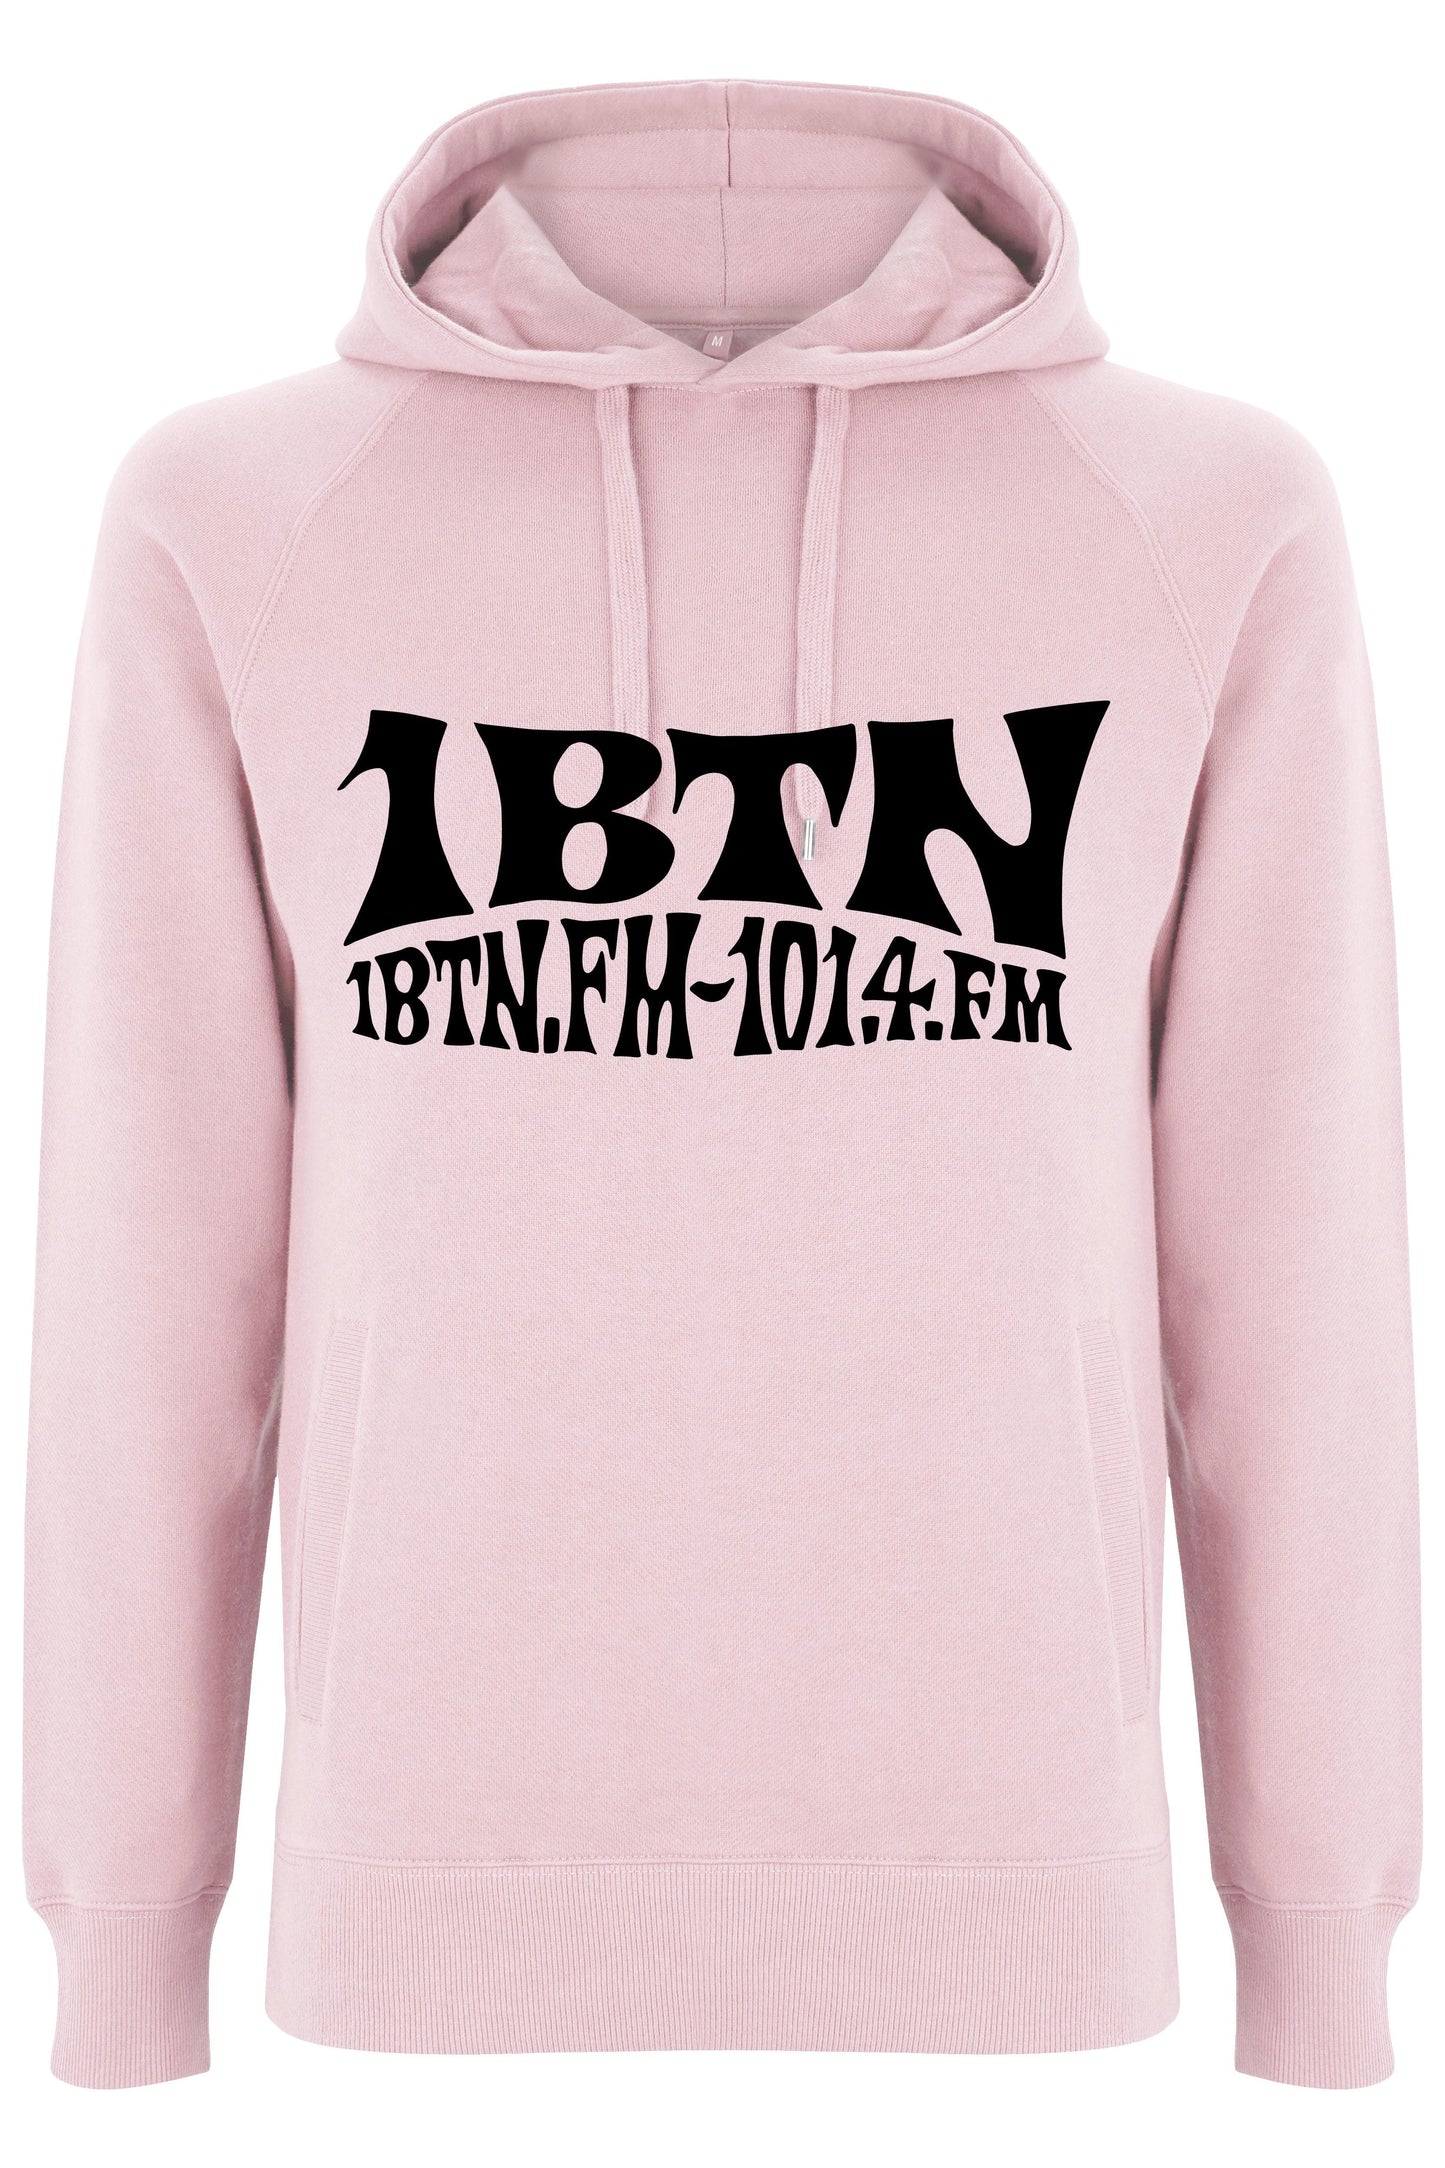 1BTN.FM 101.4 by Swifty:: Hoodie Official Merchandise of 1BTN.FM (5 Colour Options) - SOUND IS COLOUR